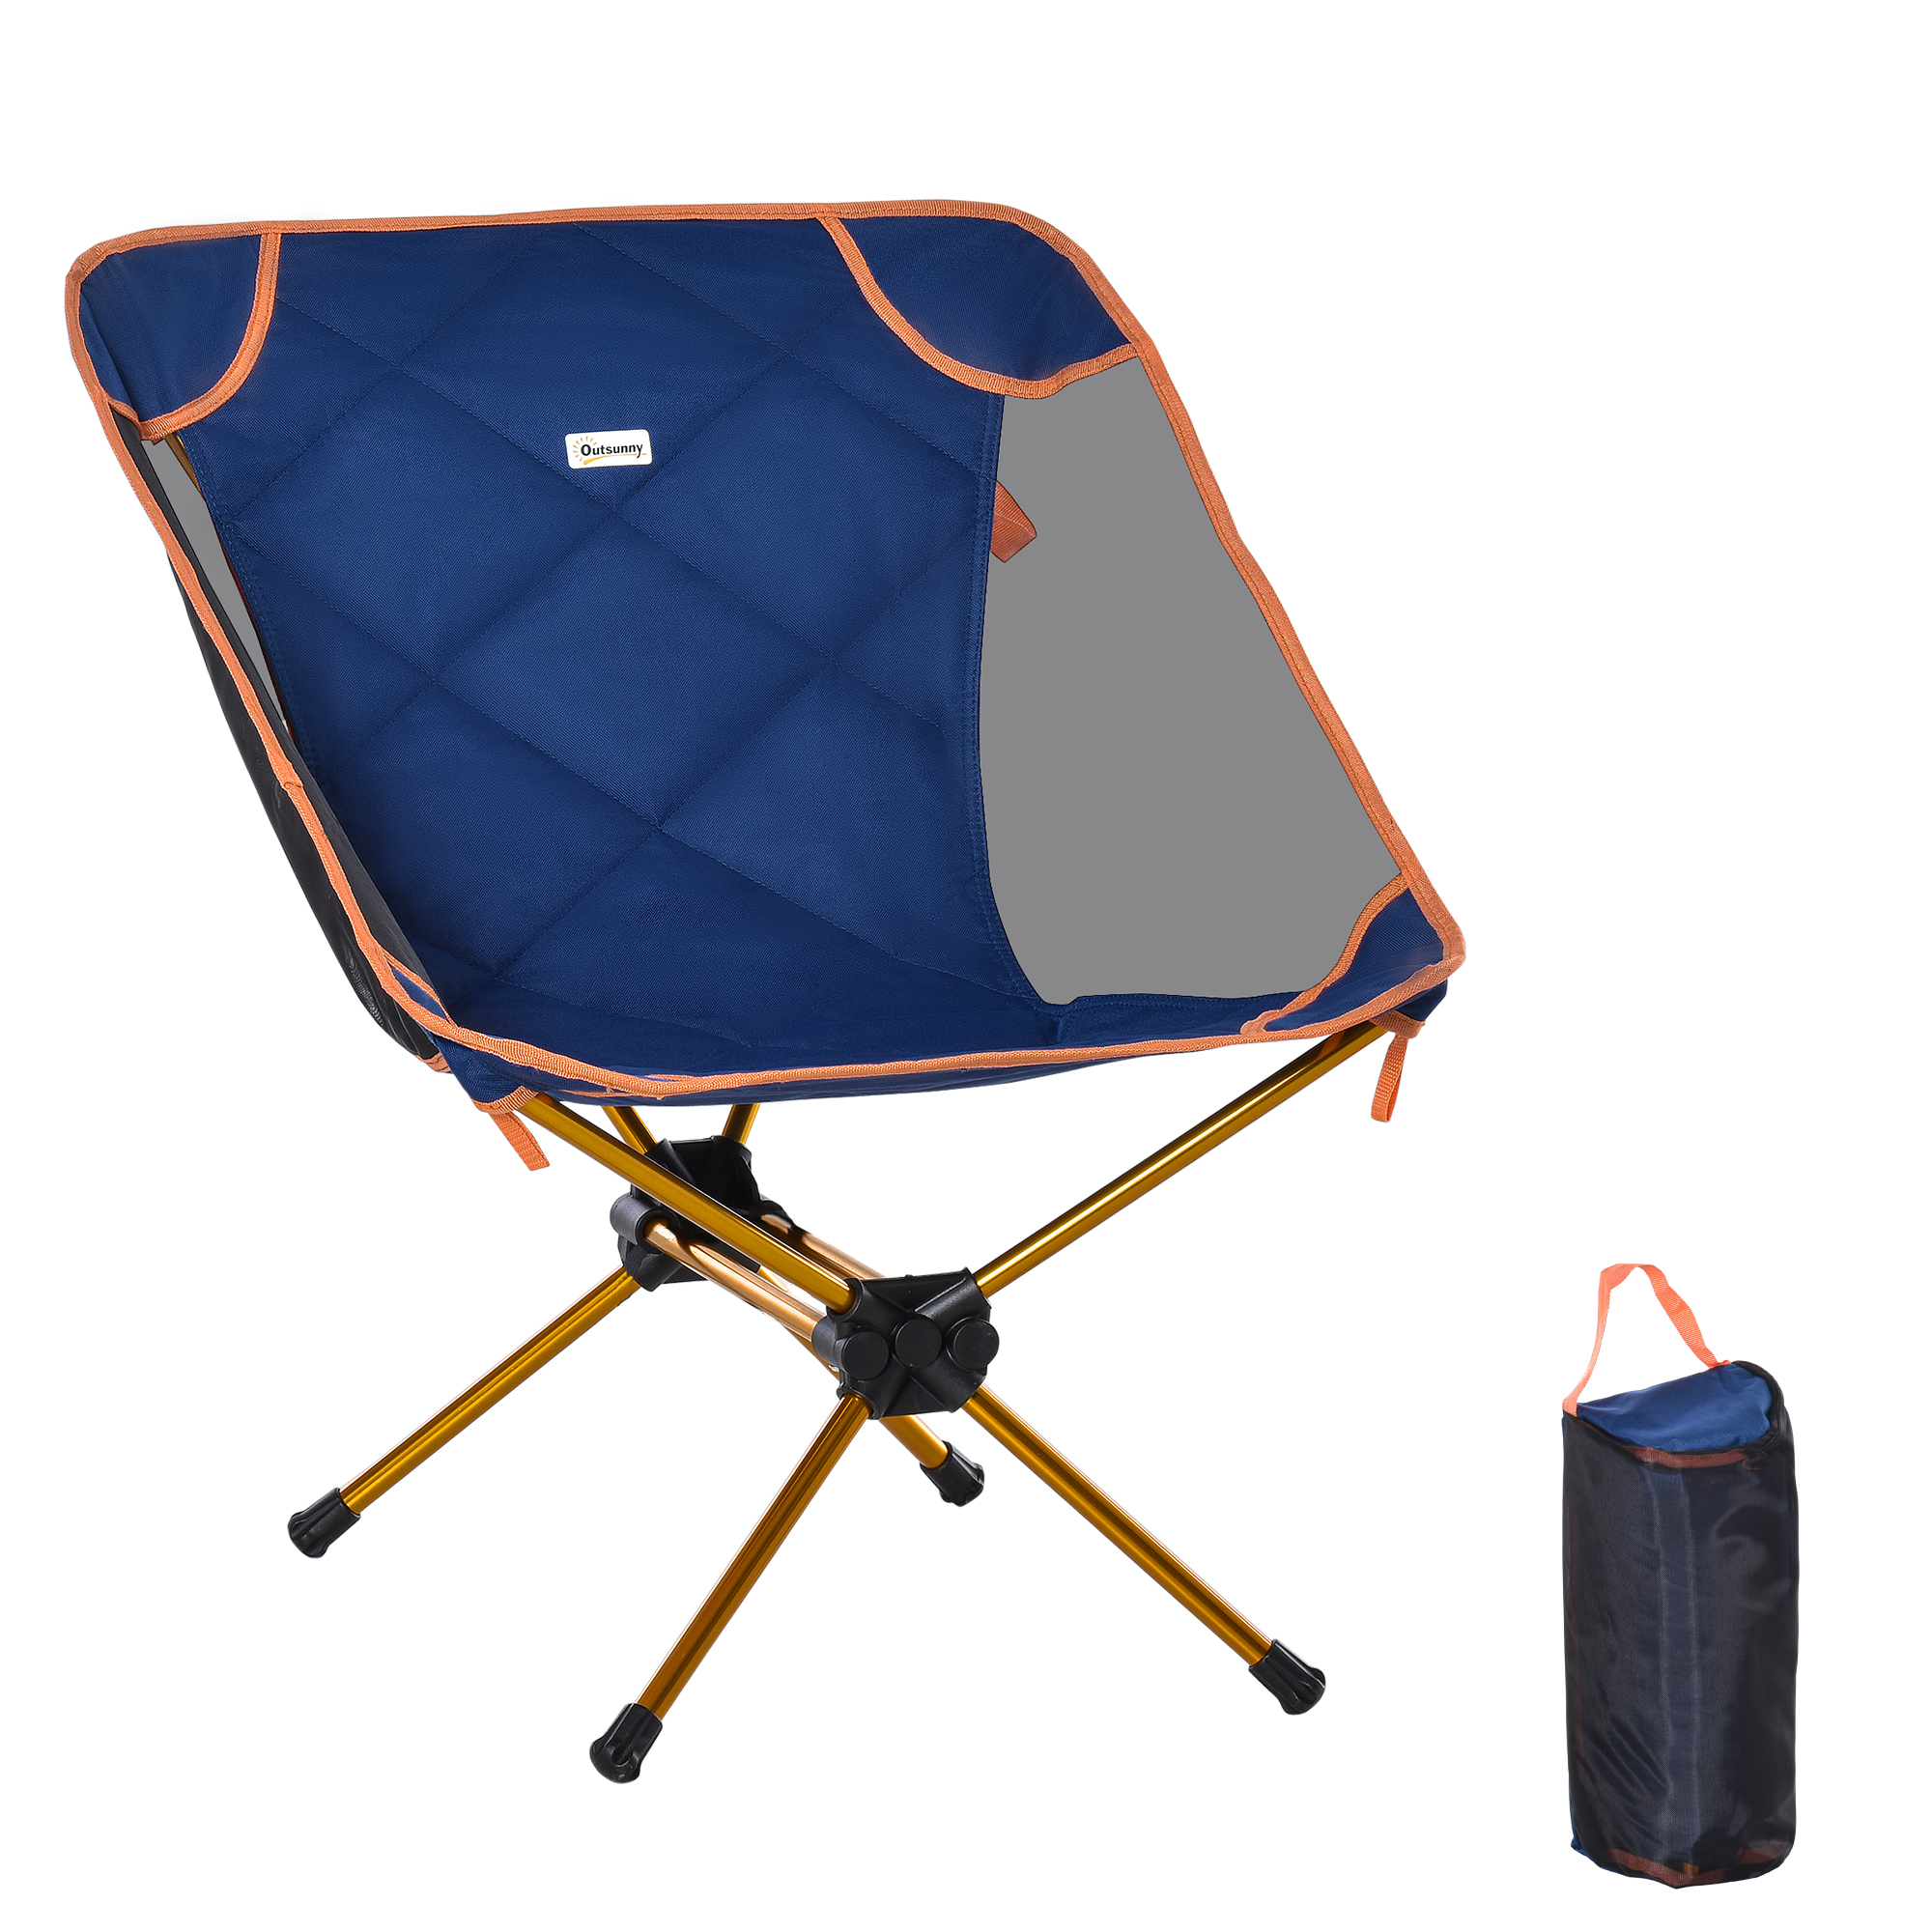 Outsunny Compact Camping Folding Chair, Padded Outdoor Chair with Portable Carry Bag, Easy Set Up, Supports 265 Lbs, for Hiking Fishing Trip Beach - image 1 of 9